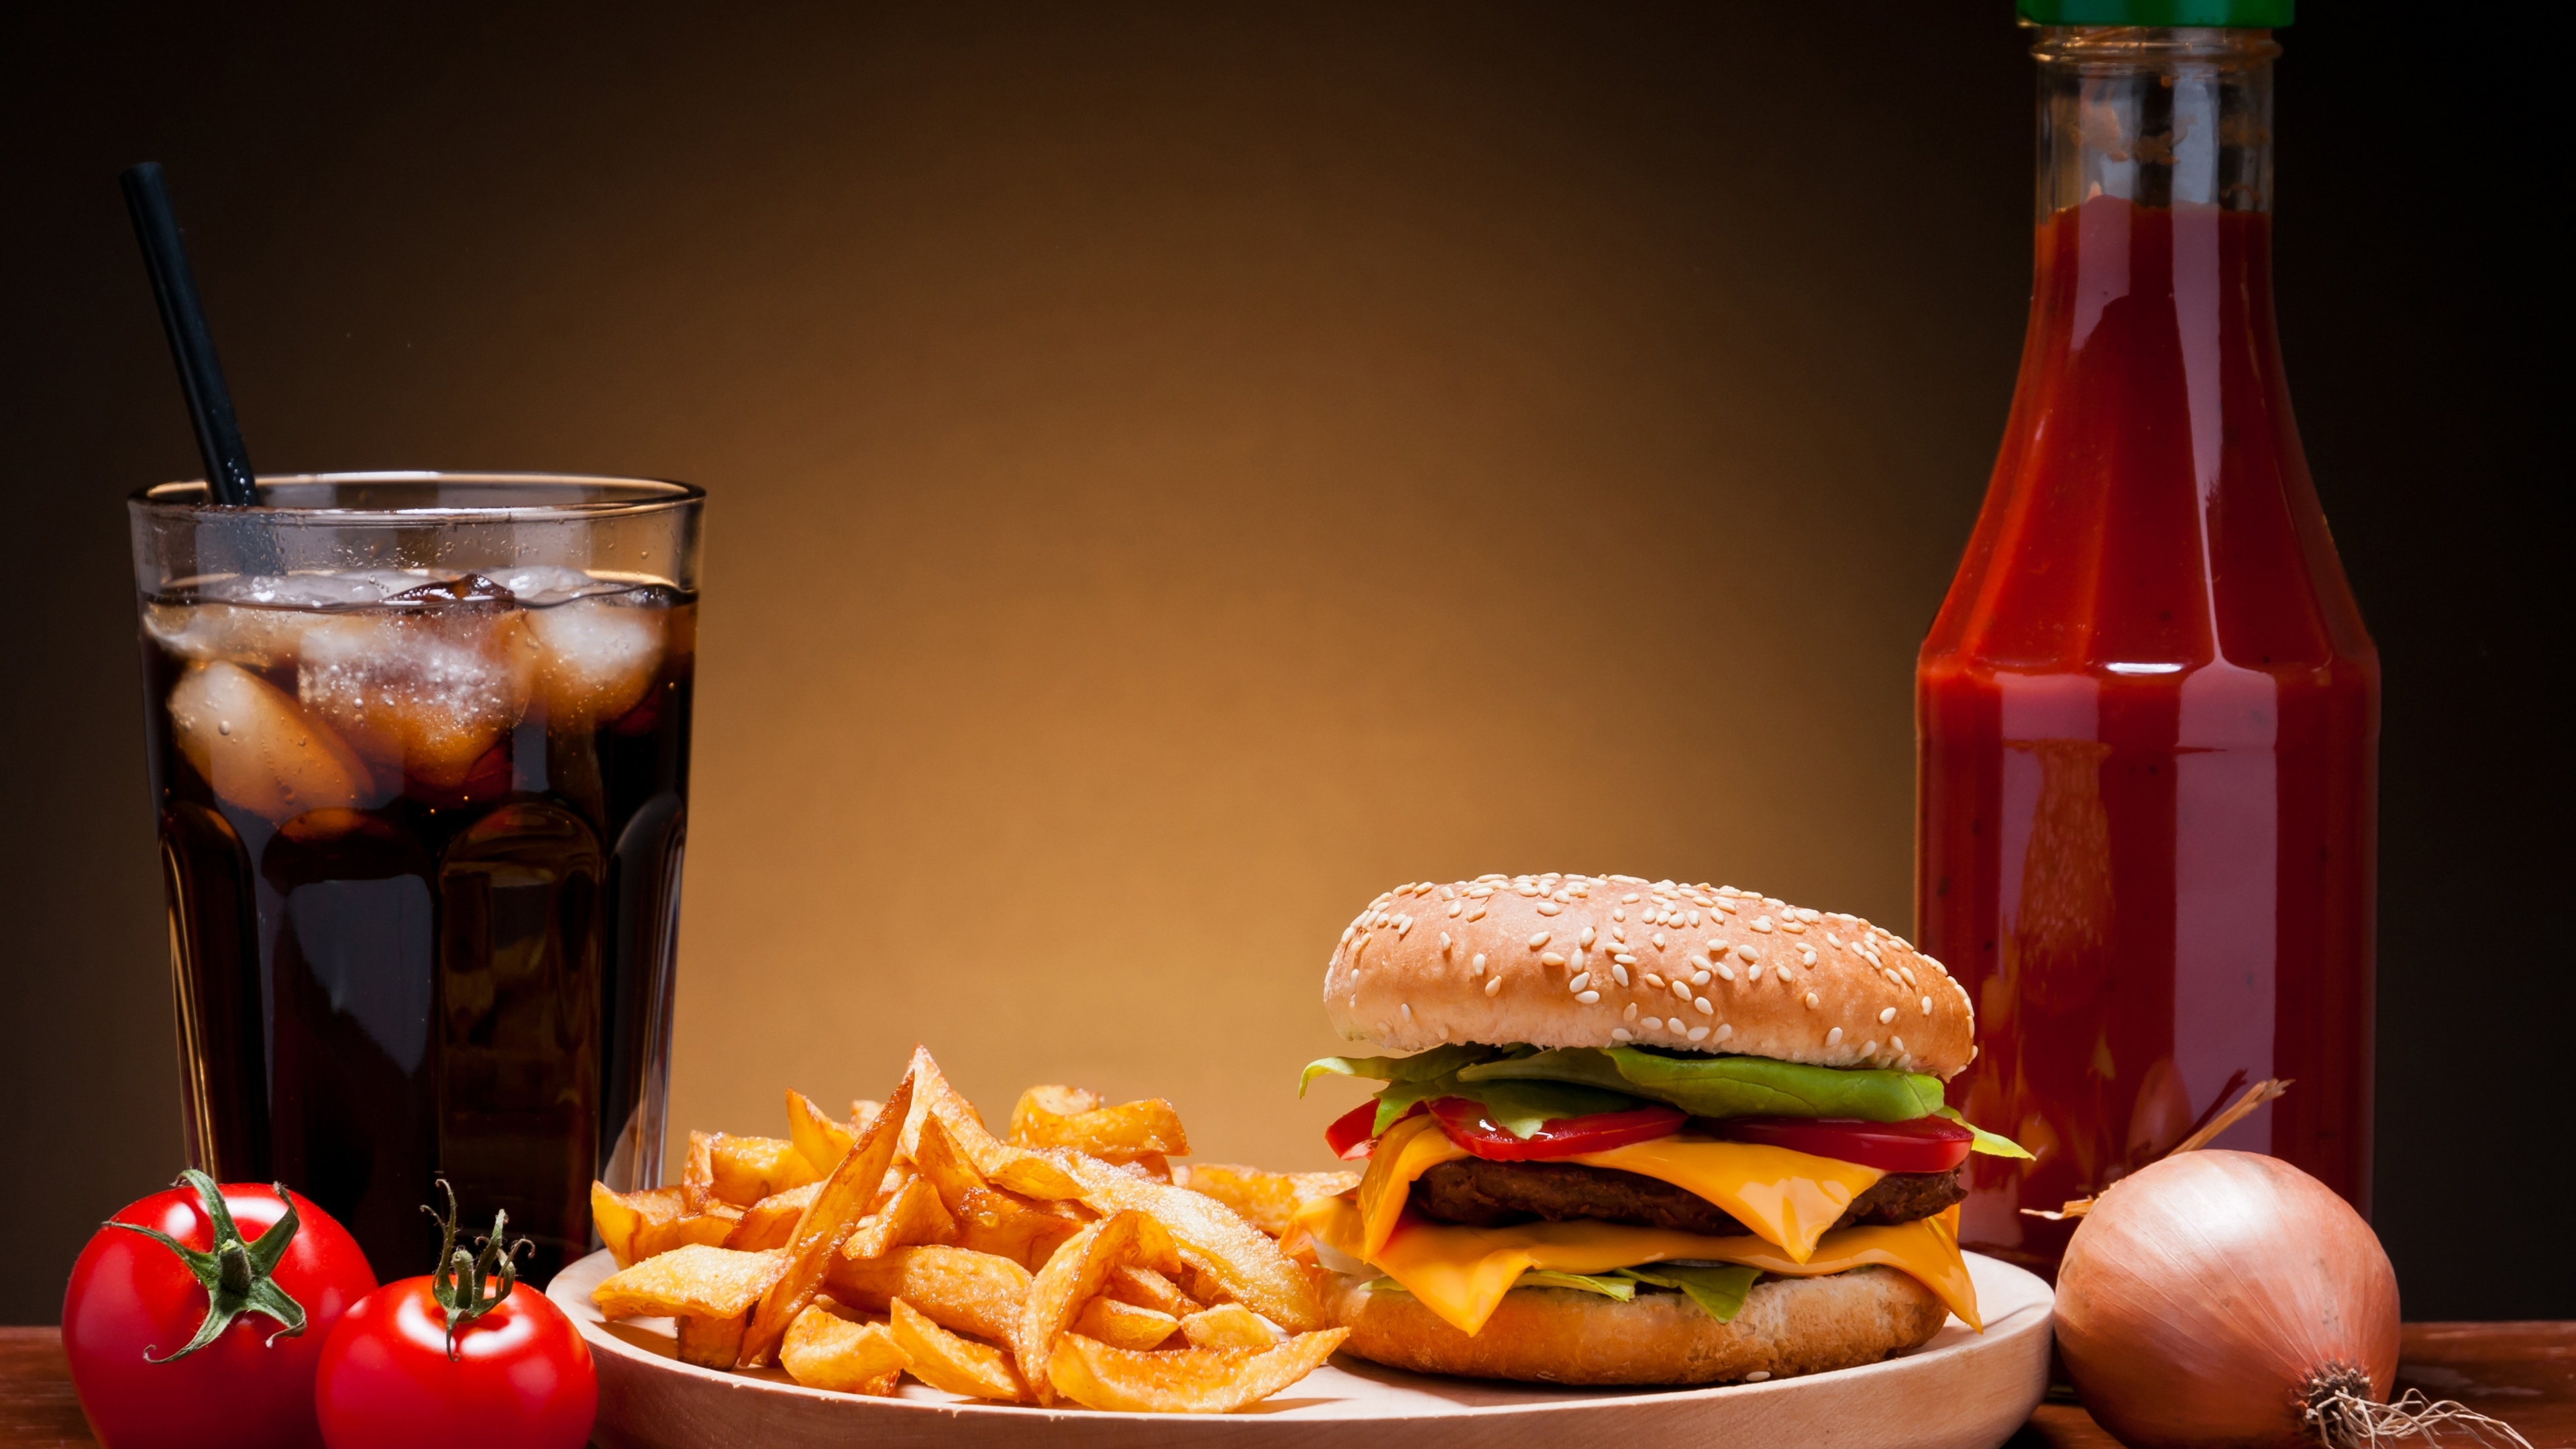 Burgers Fries Soda Food Onions Tomatoes Ketchup Lettuce Cheese 3840x2160